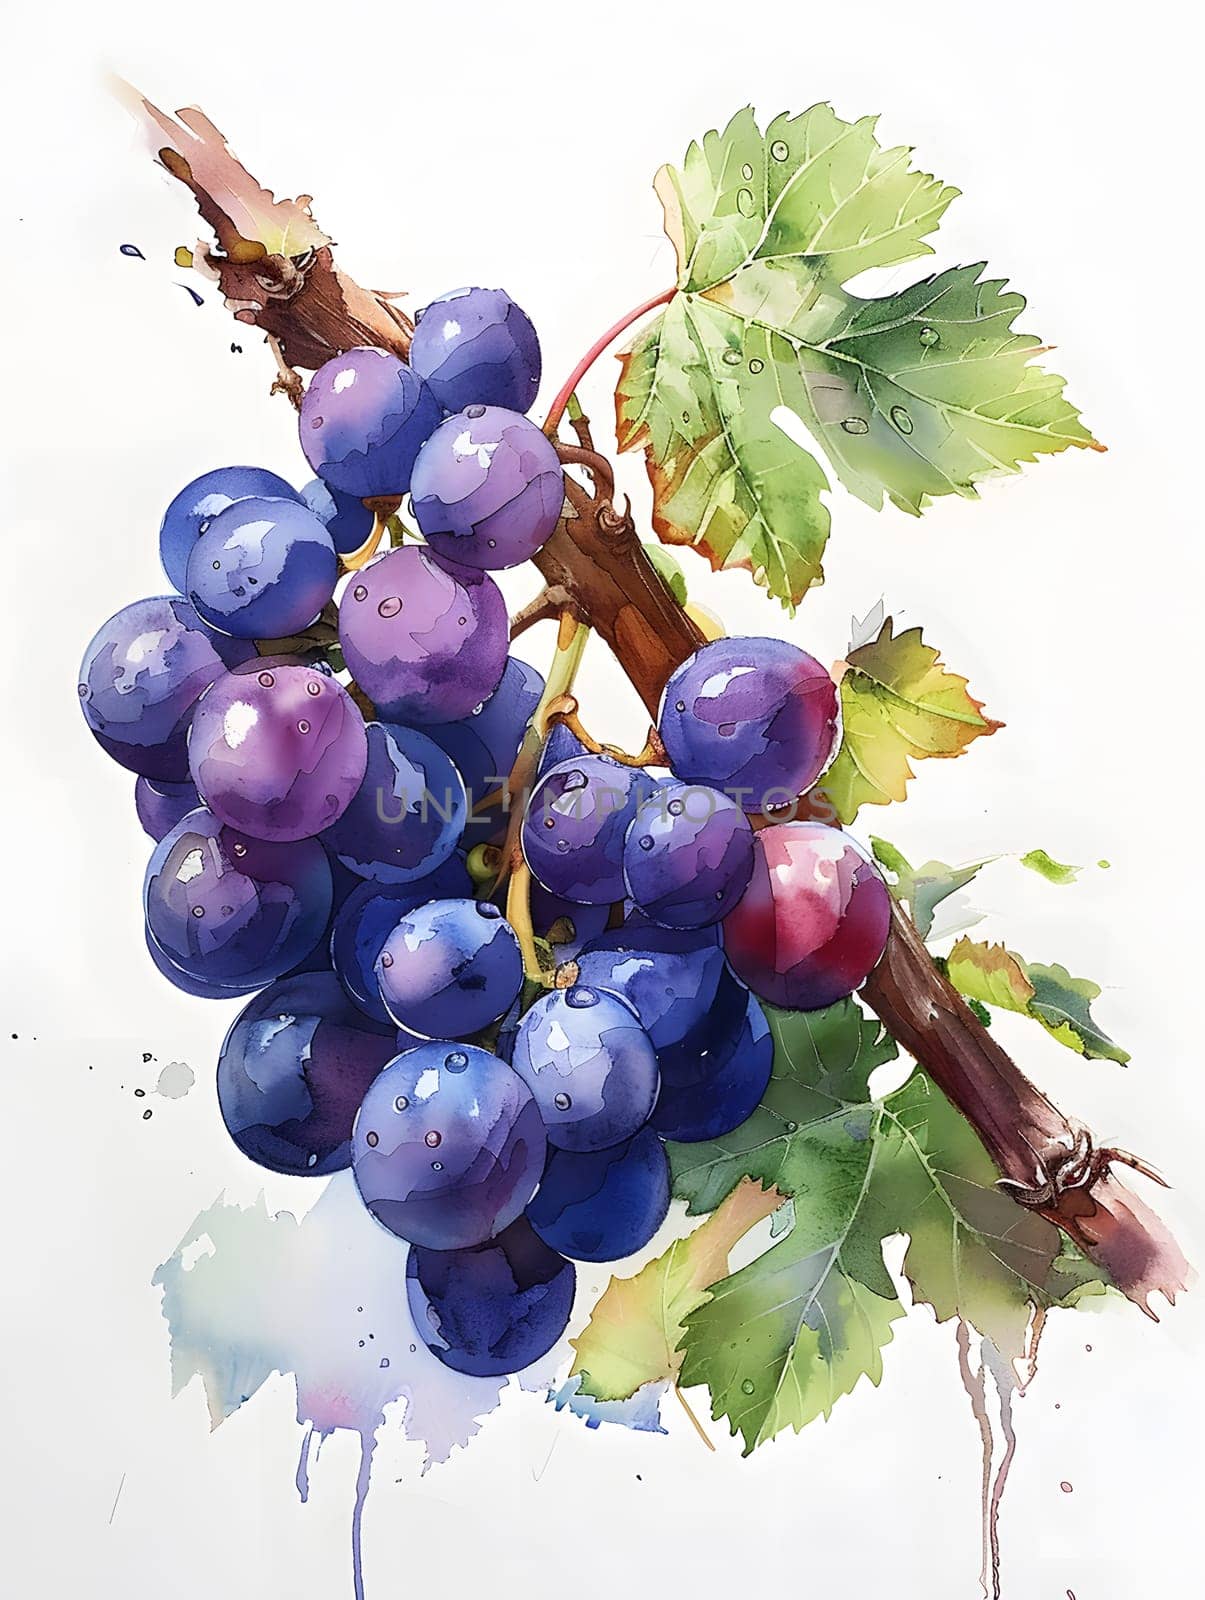 A beautiful watercolor painting of a bunch of grapes hanging from a vine. The image showcases the natural beauty of seedless fruit from the grapevine family